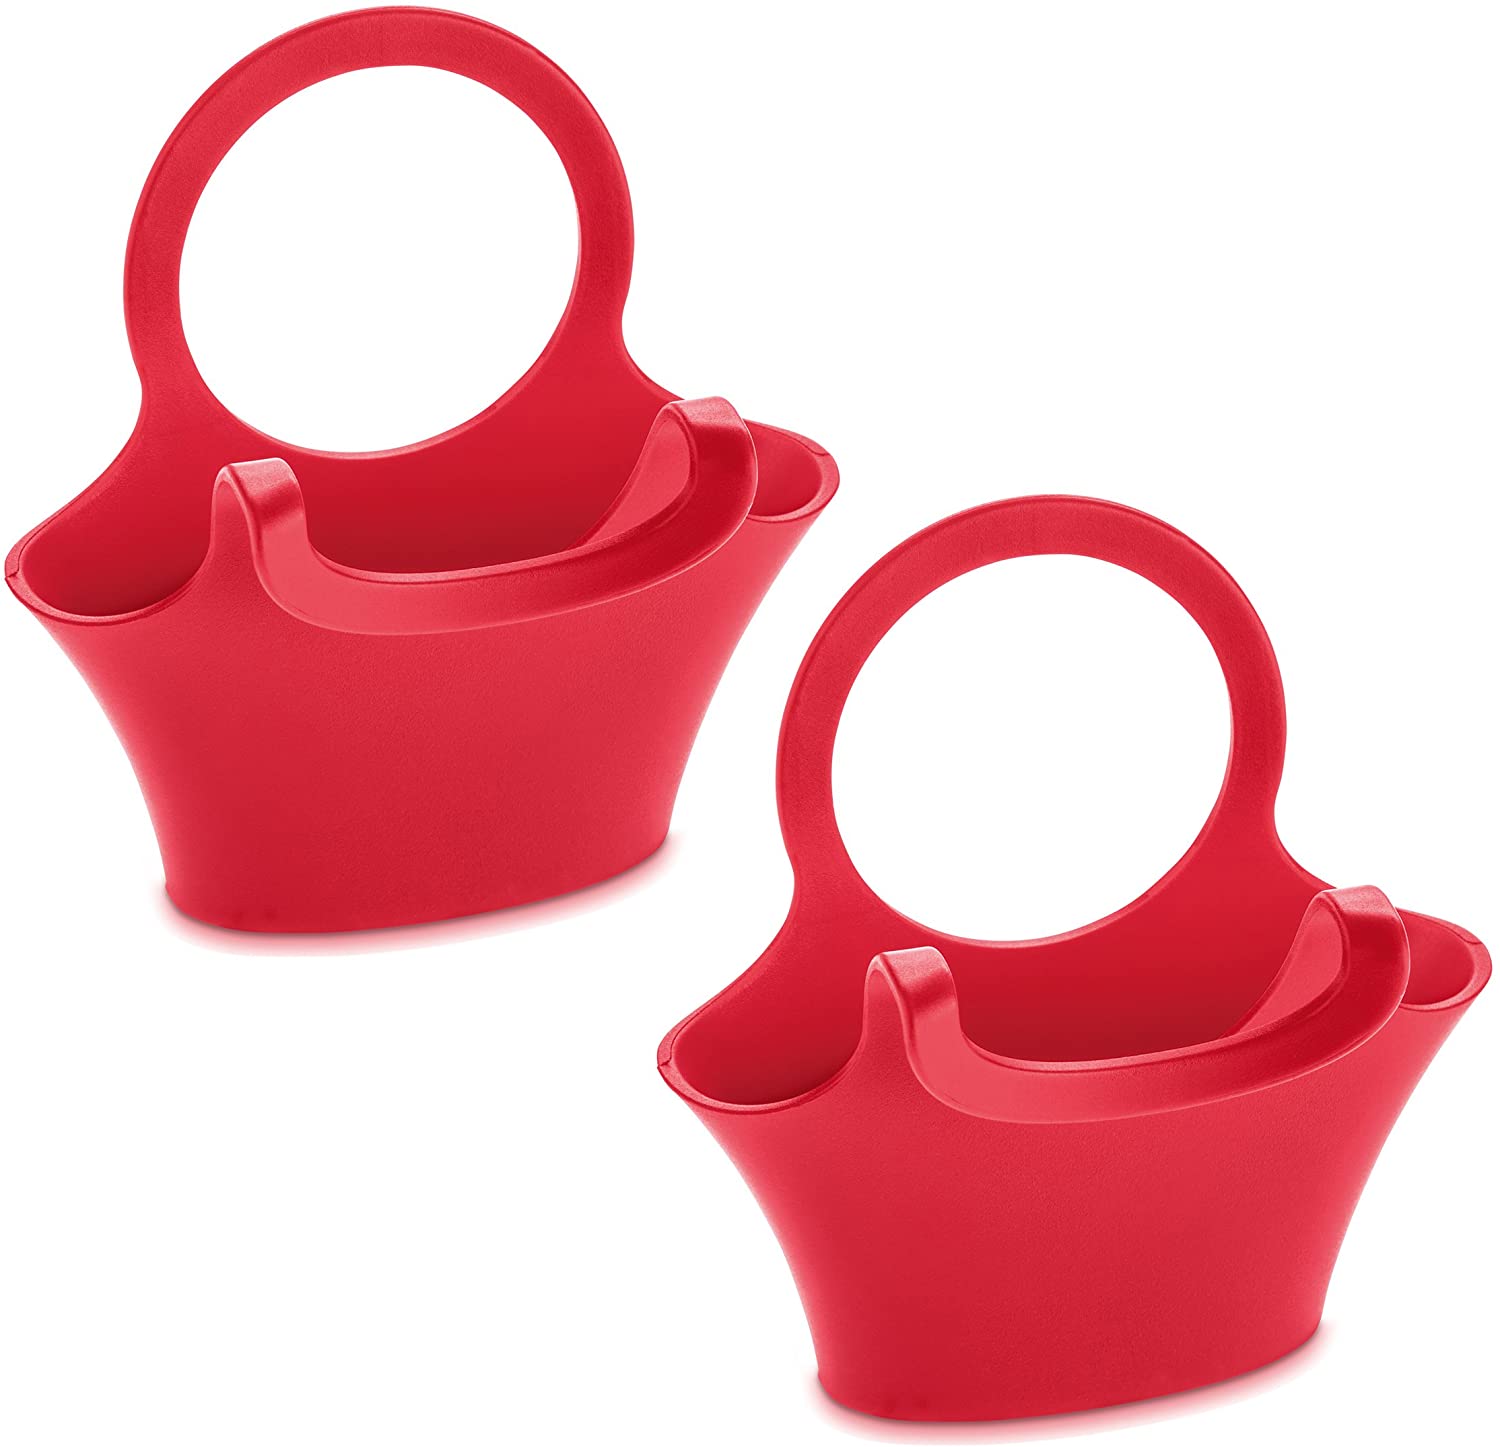 Jessi Cup Utensil Set Of 2, Solid Raspberry Red